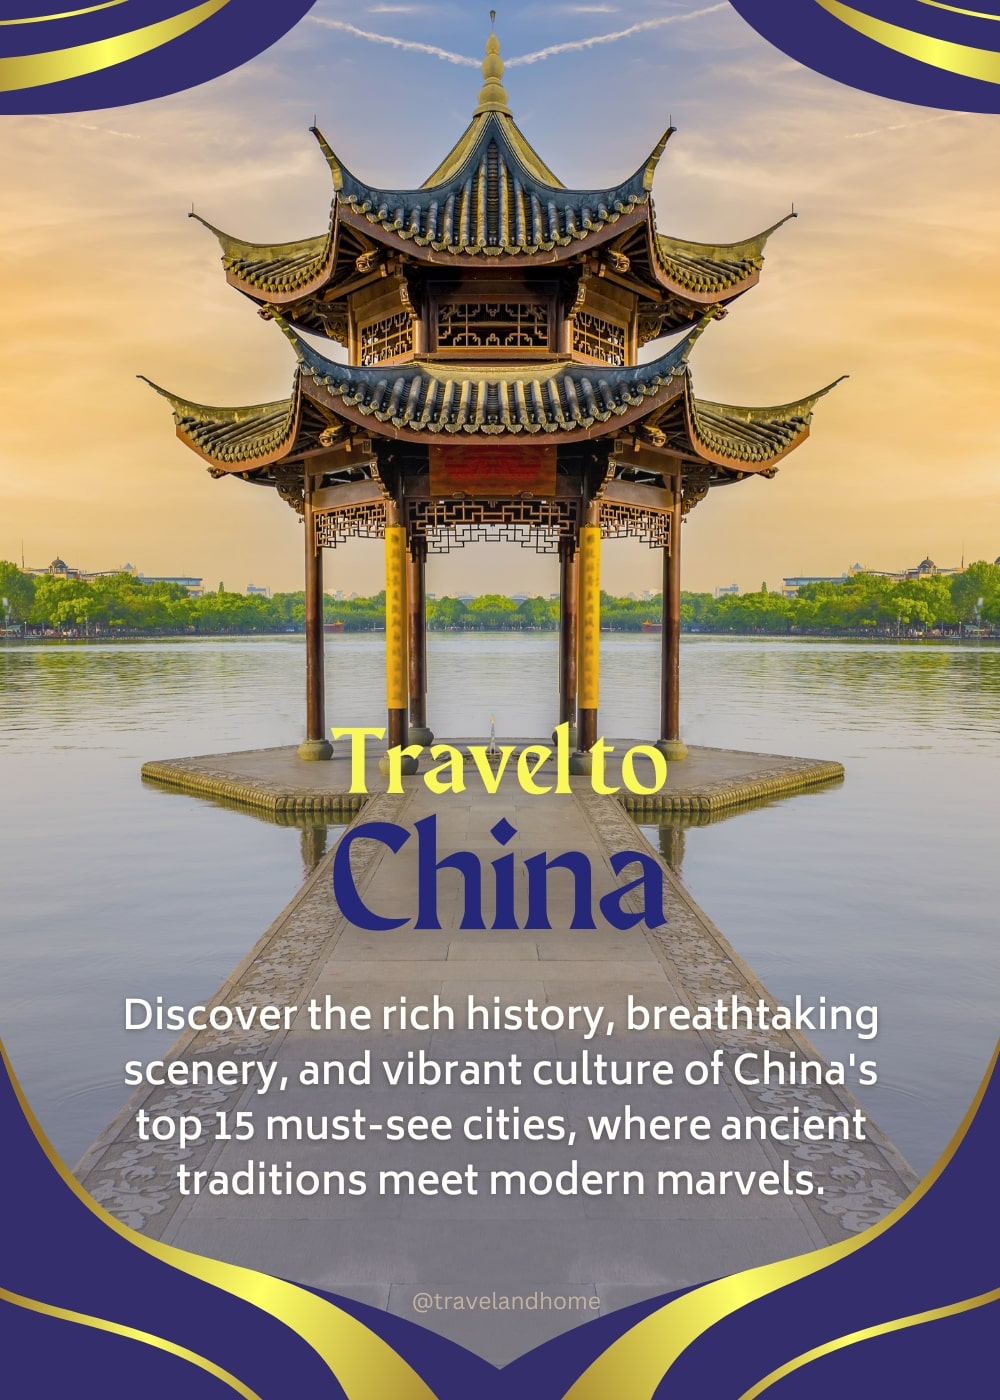 Chinas must visit cities Best city holidays in China China city vacation hotspots travel and home min